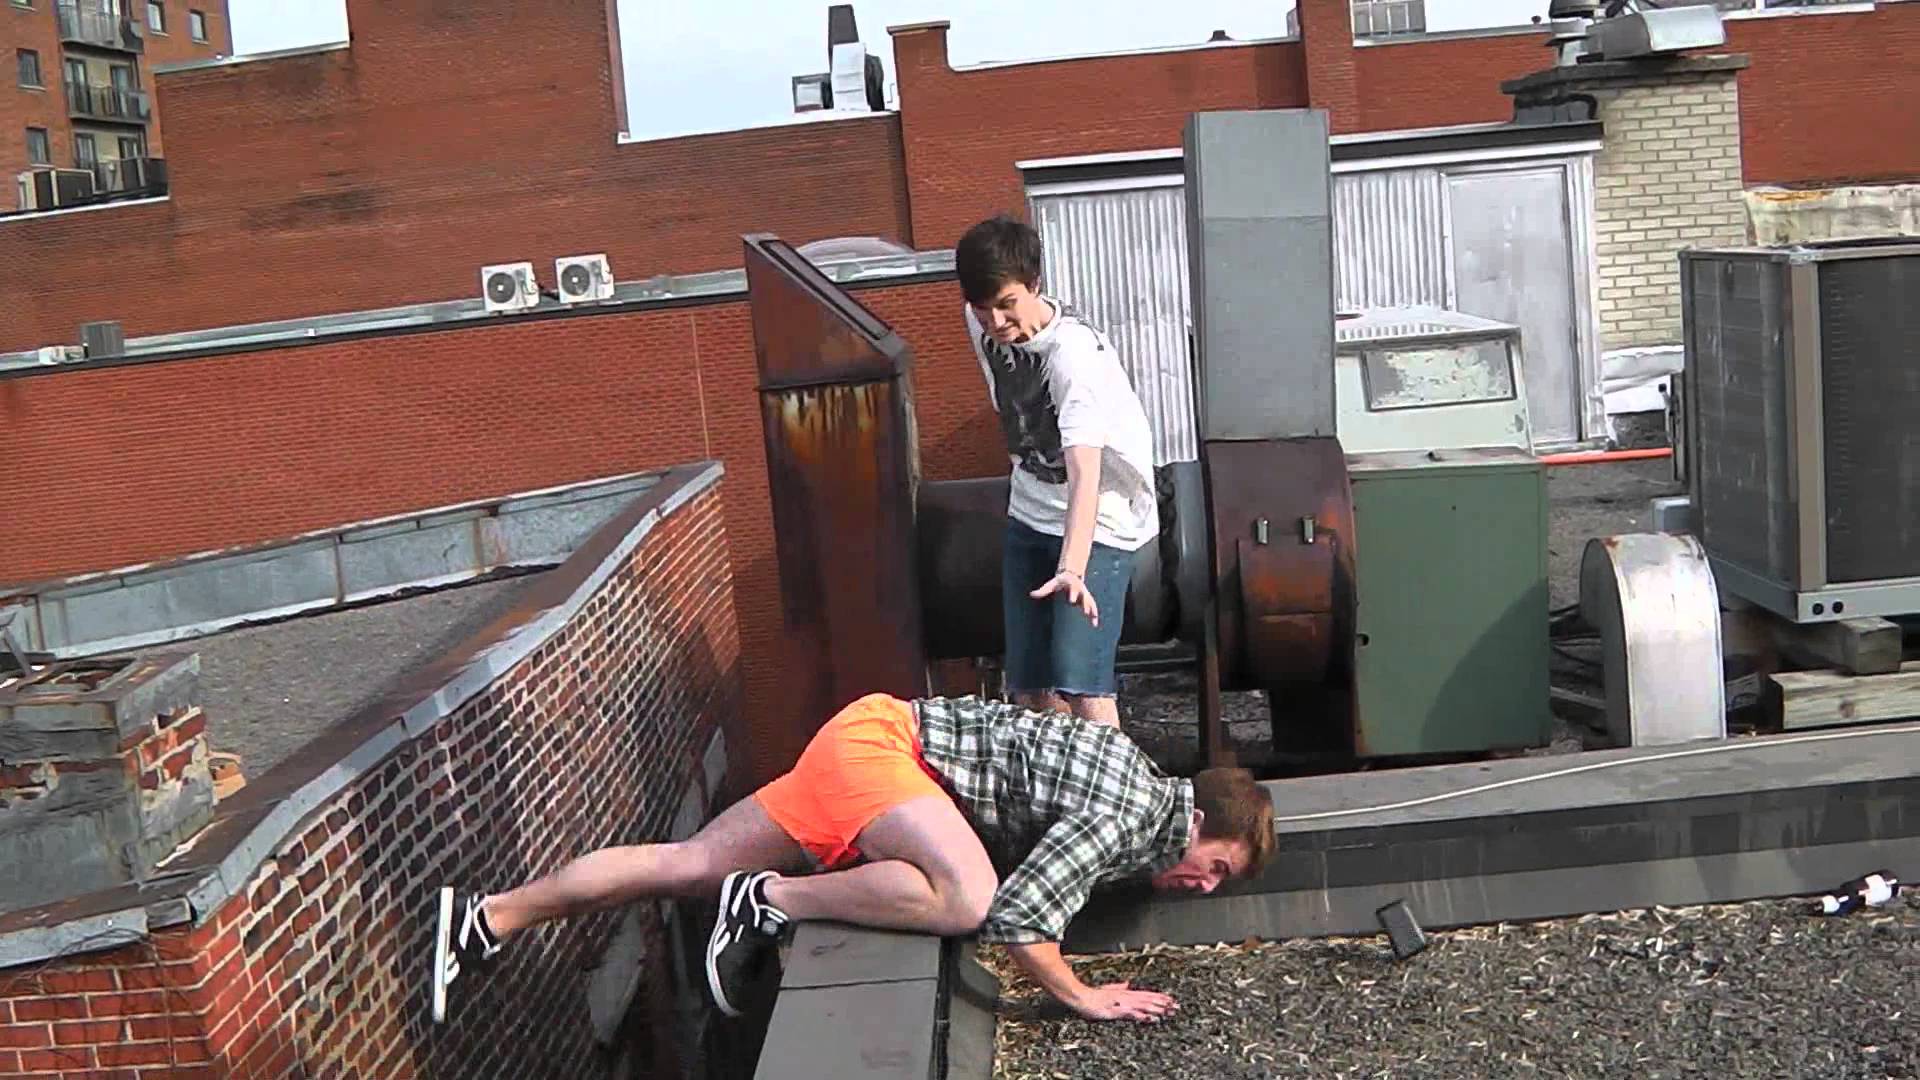 Funny Parkour Fails 27 Widescreen Wallpaper on Funnypicture.org.